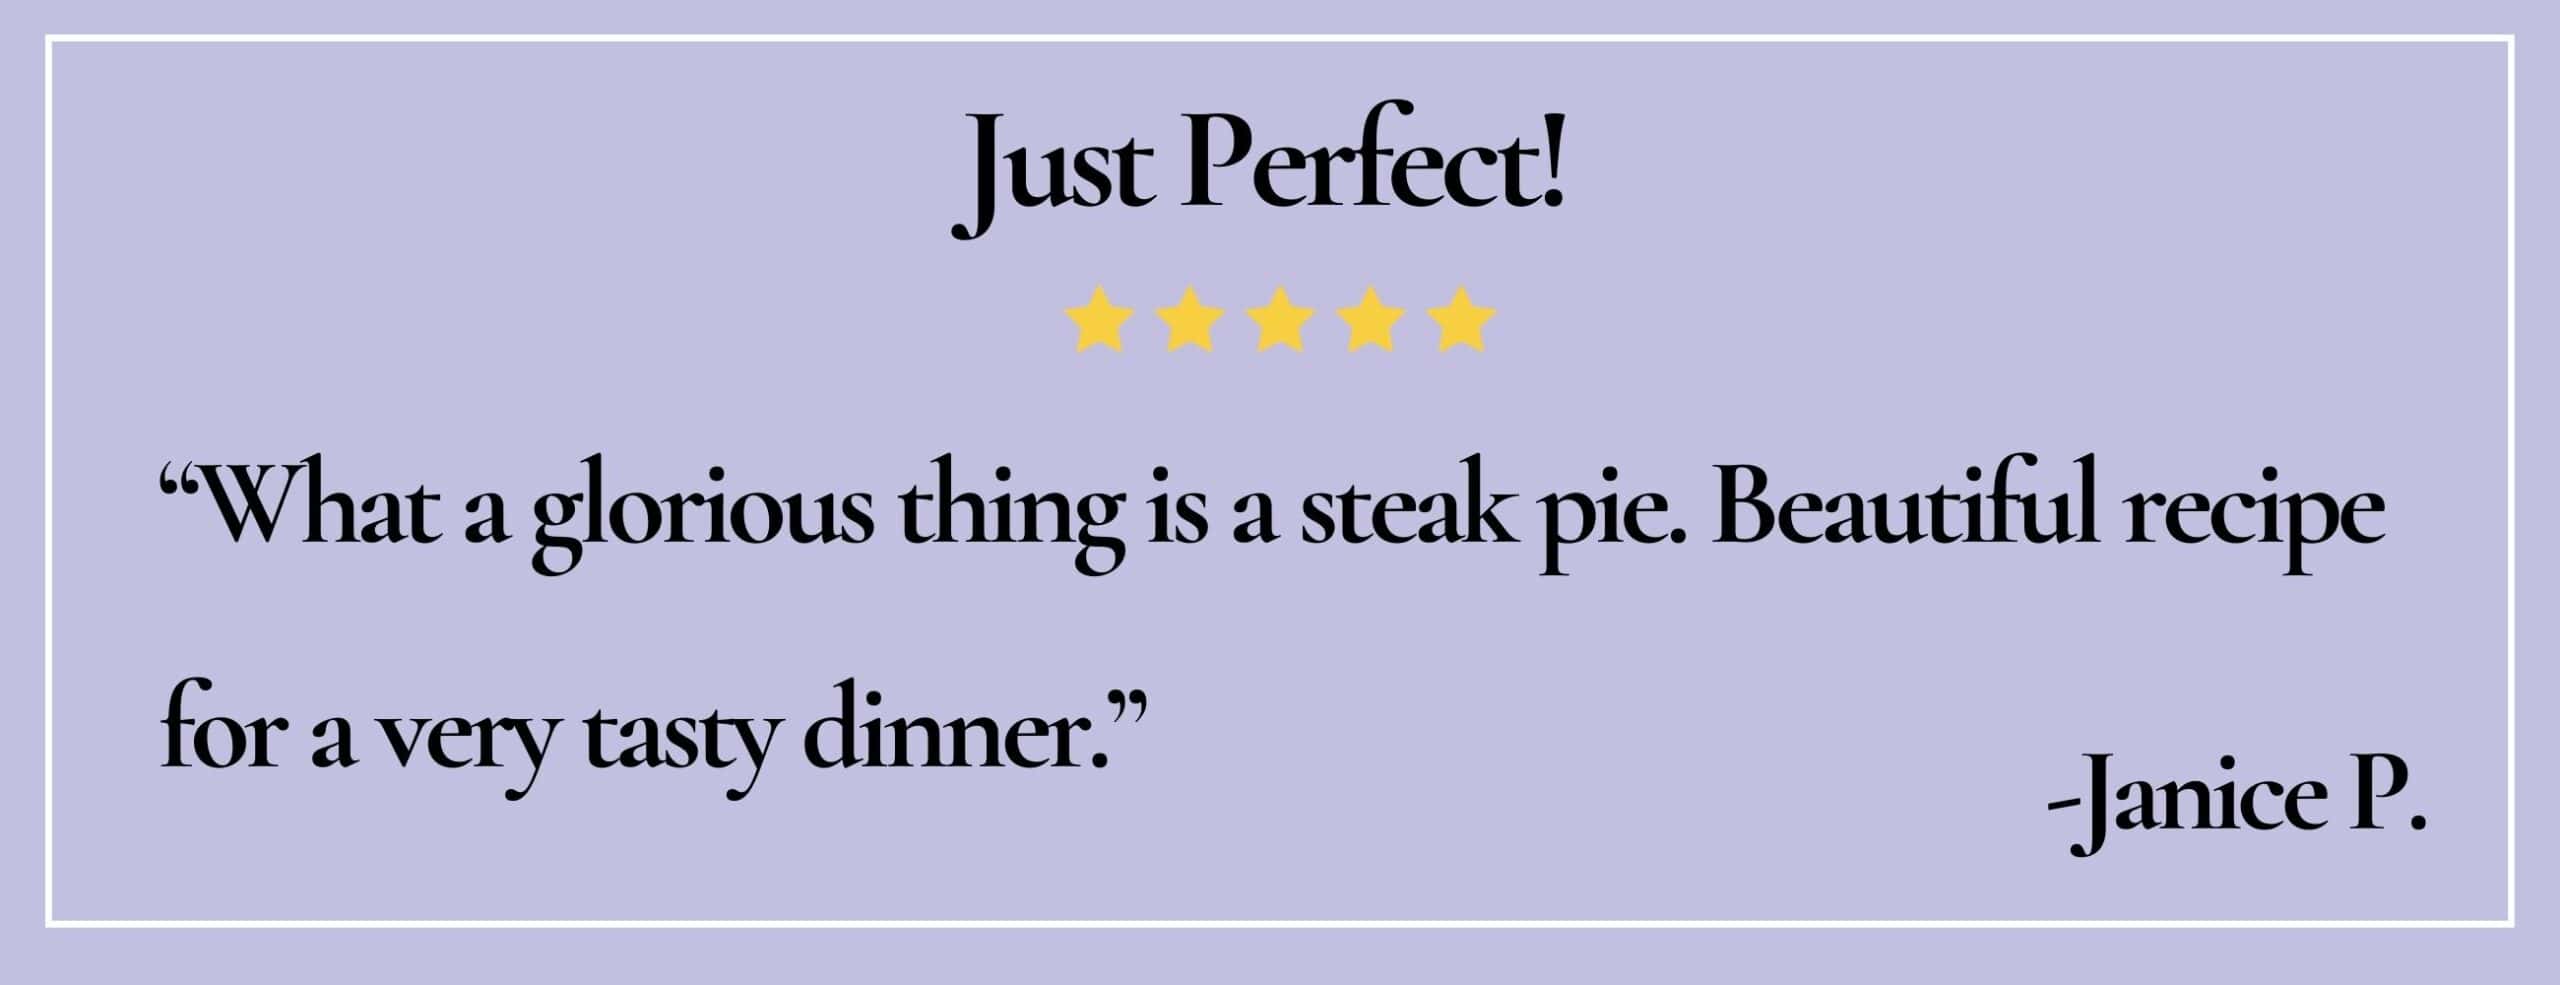 text box with quote: "What a glorious thing is a steak pie. Beautiful recipe for a very tasty dinner." -Janice P.